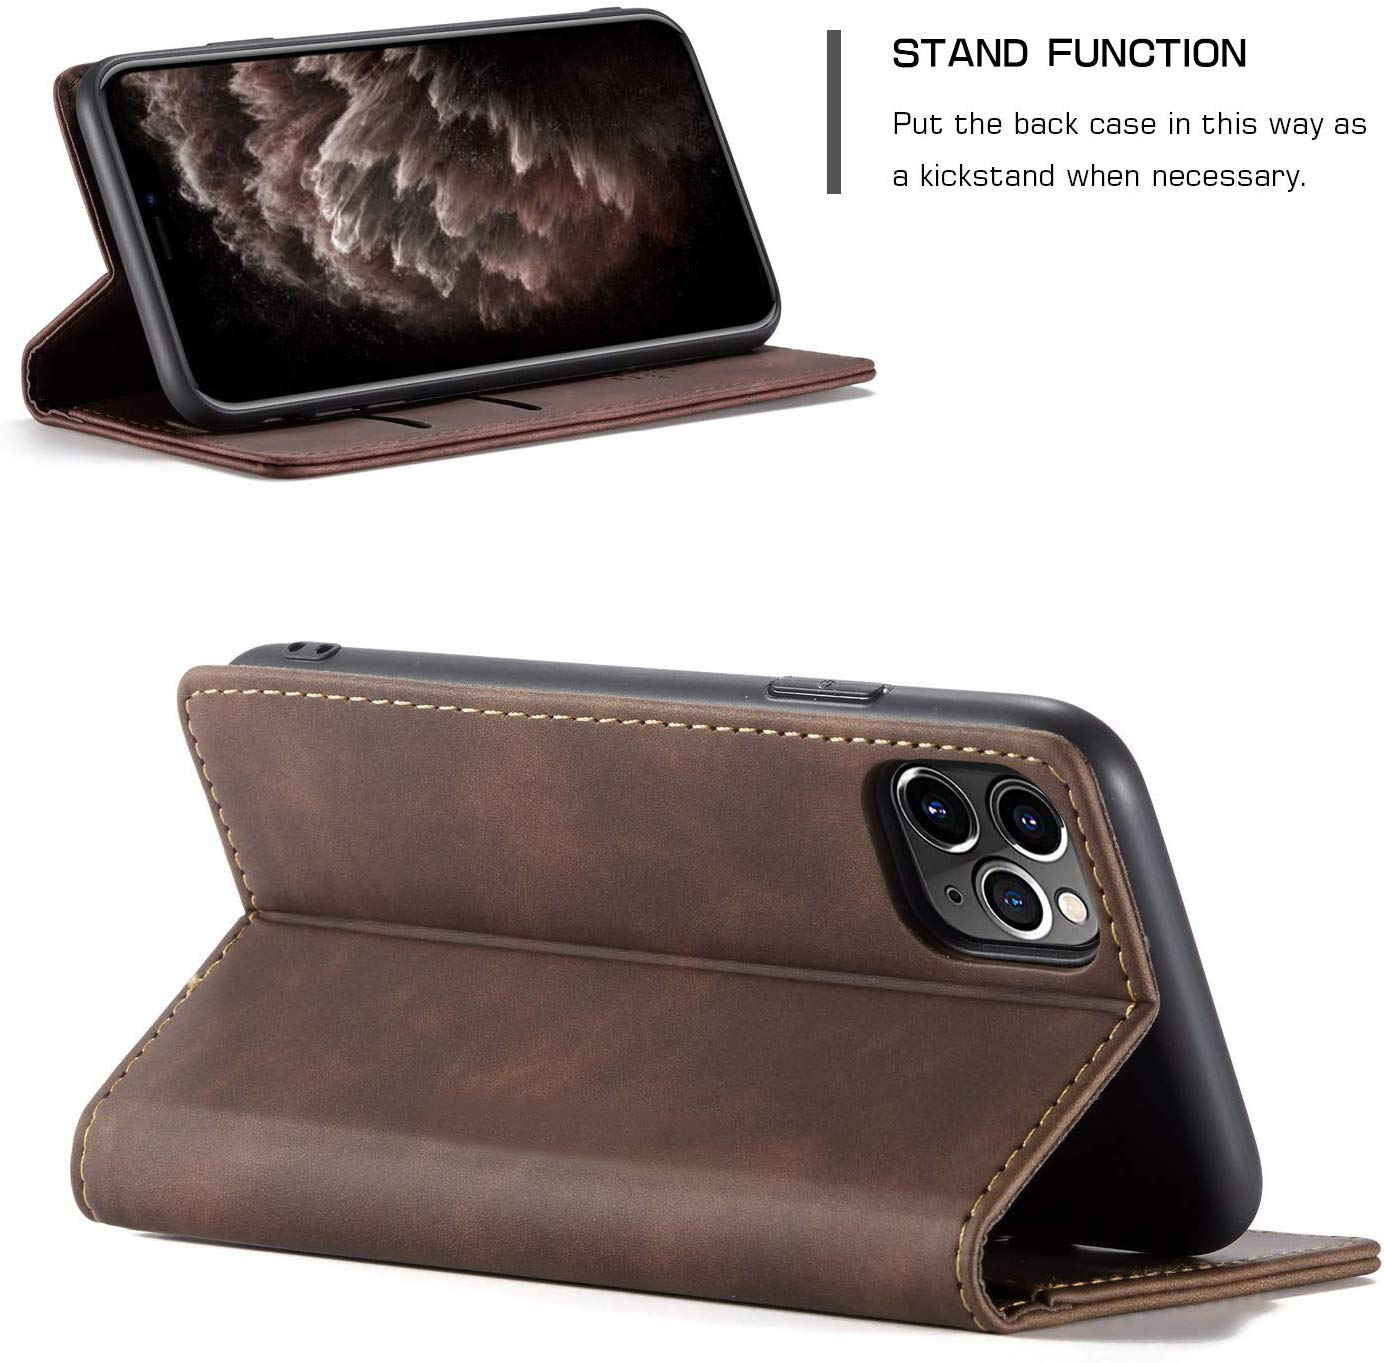 Excelsior Premium PU Leather Wallet flip Cover Case For Apple iPhone 11 Pro Max